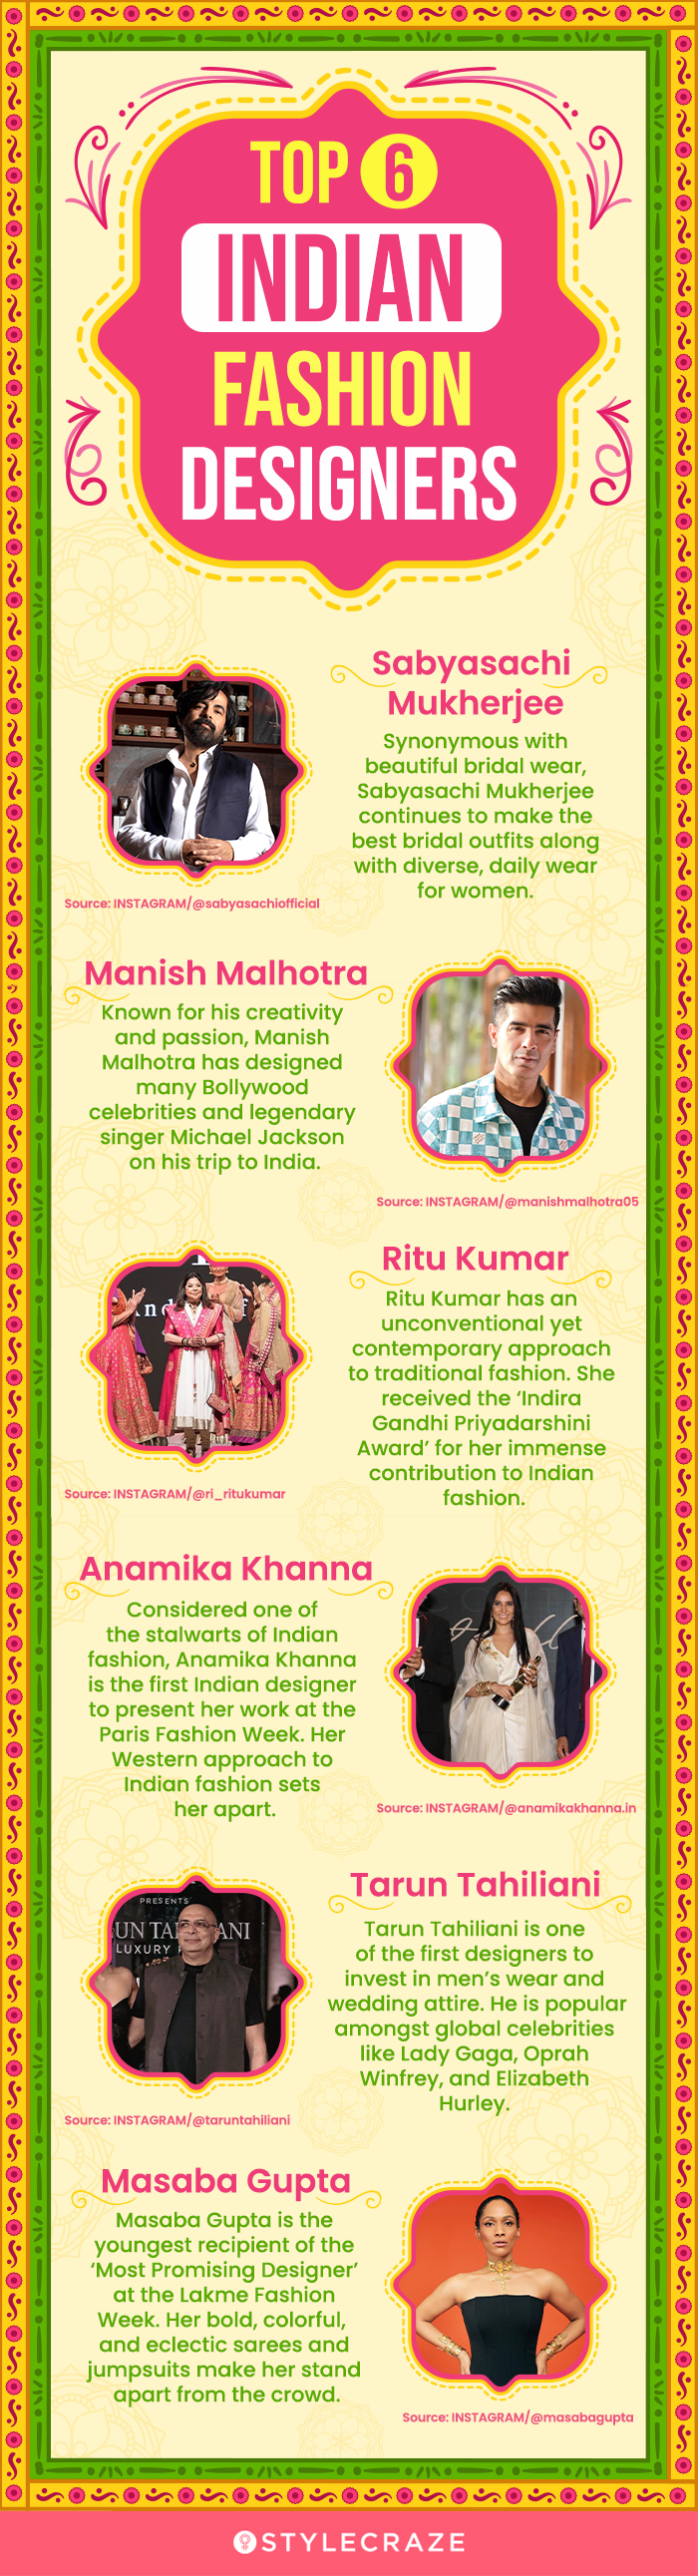 top 6 indian fashion designers (infographic)